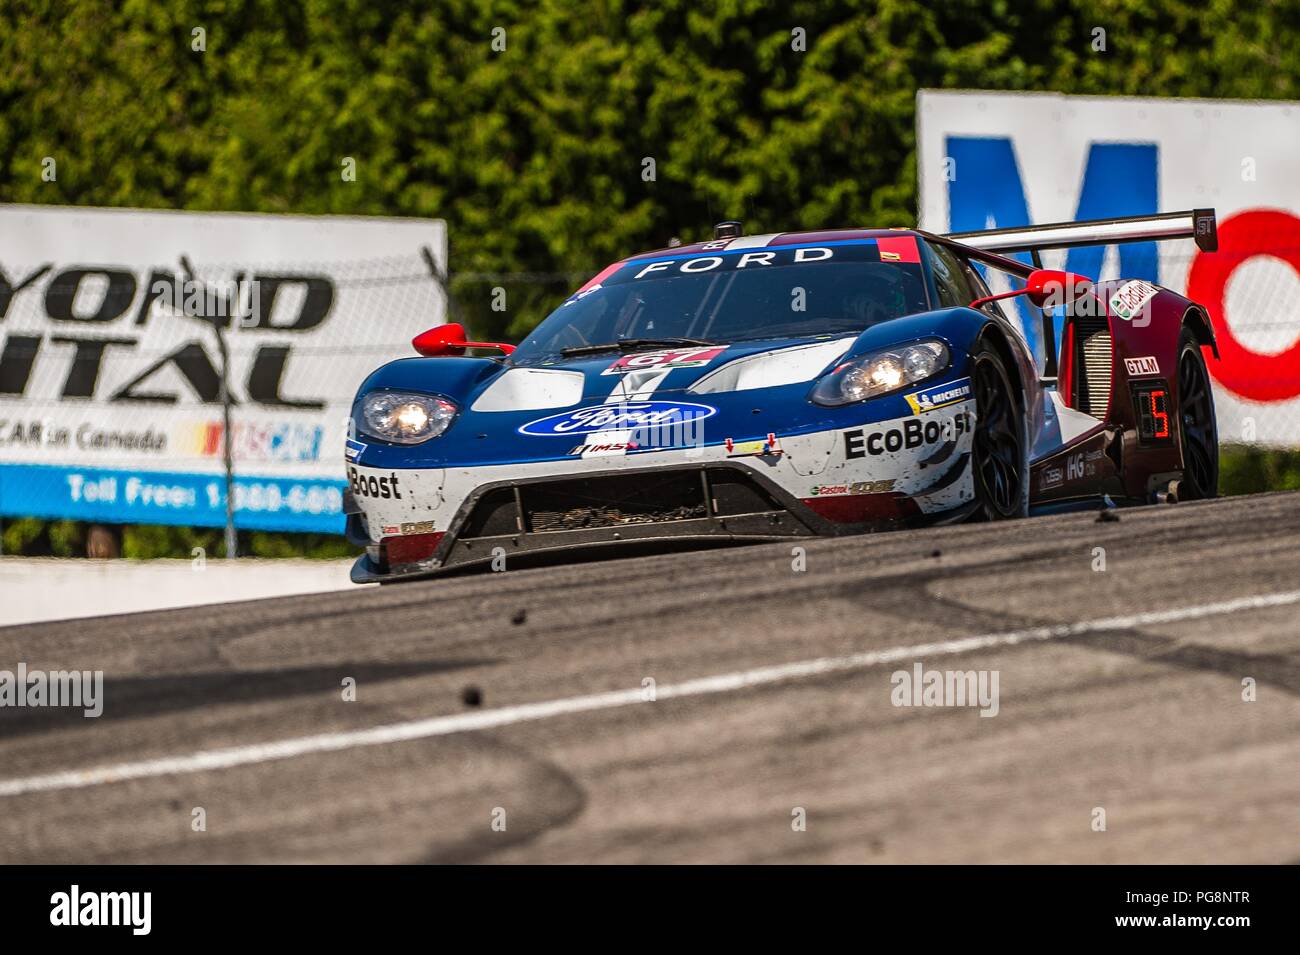 Bowmanville, CAN., 08 Jul 2018. 8th July, 2018. The number 67 Ford GT, driven by the team of Ryan Briscoe and Richard Westbrook, in the GT Le Mans series, navigate the hairpin number 5 Moss corner on 08 of July, 2018 at Canadian Tire Motorsport Park during the Mobil 1 SportsCar Grand Prix weekend. Credit: Victor Biro/ZUMA Wire/Alamy Live News Stock Photo